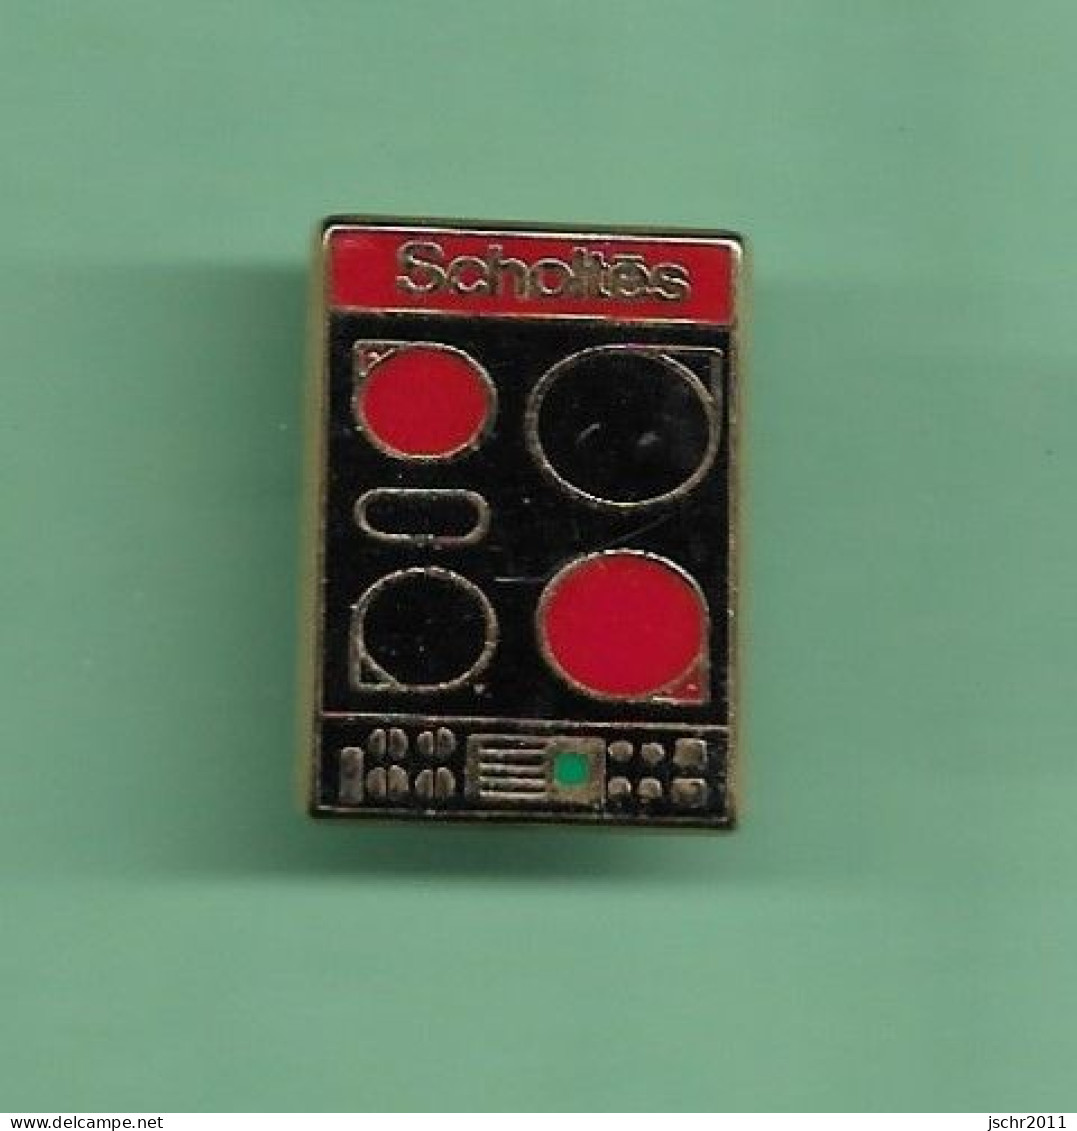 Pin's *** SCHOLTES *** Serie Limitee *** WW03 (9-3) - Trademarks